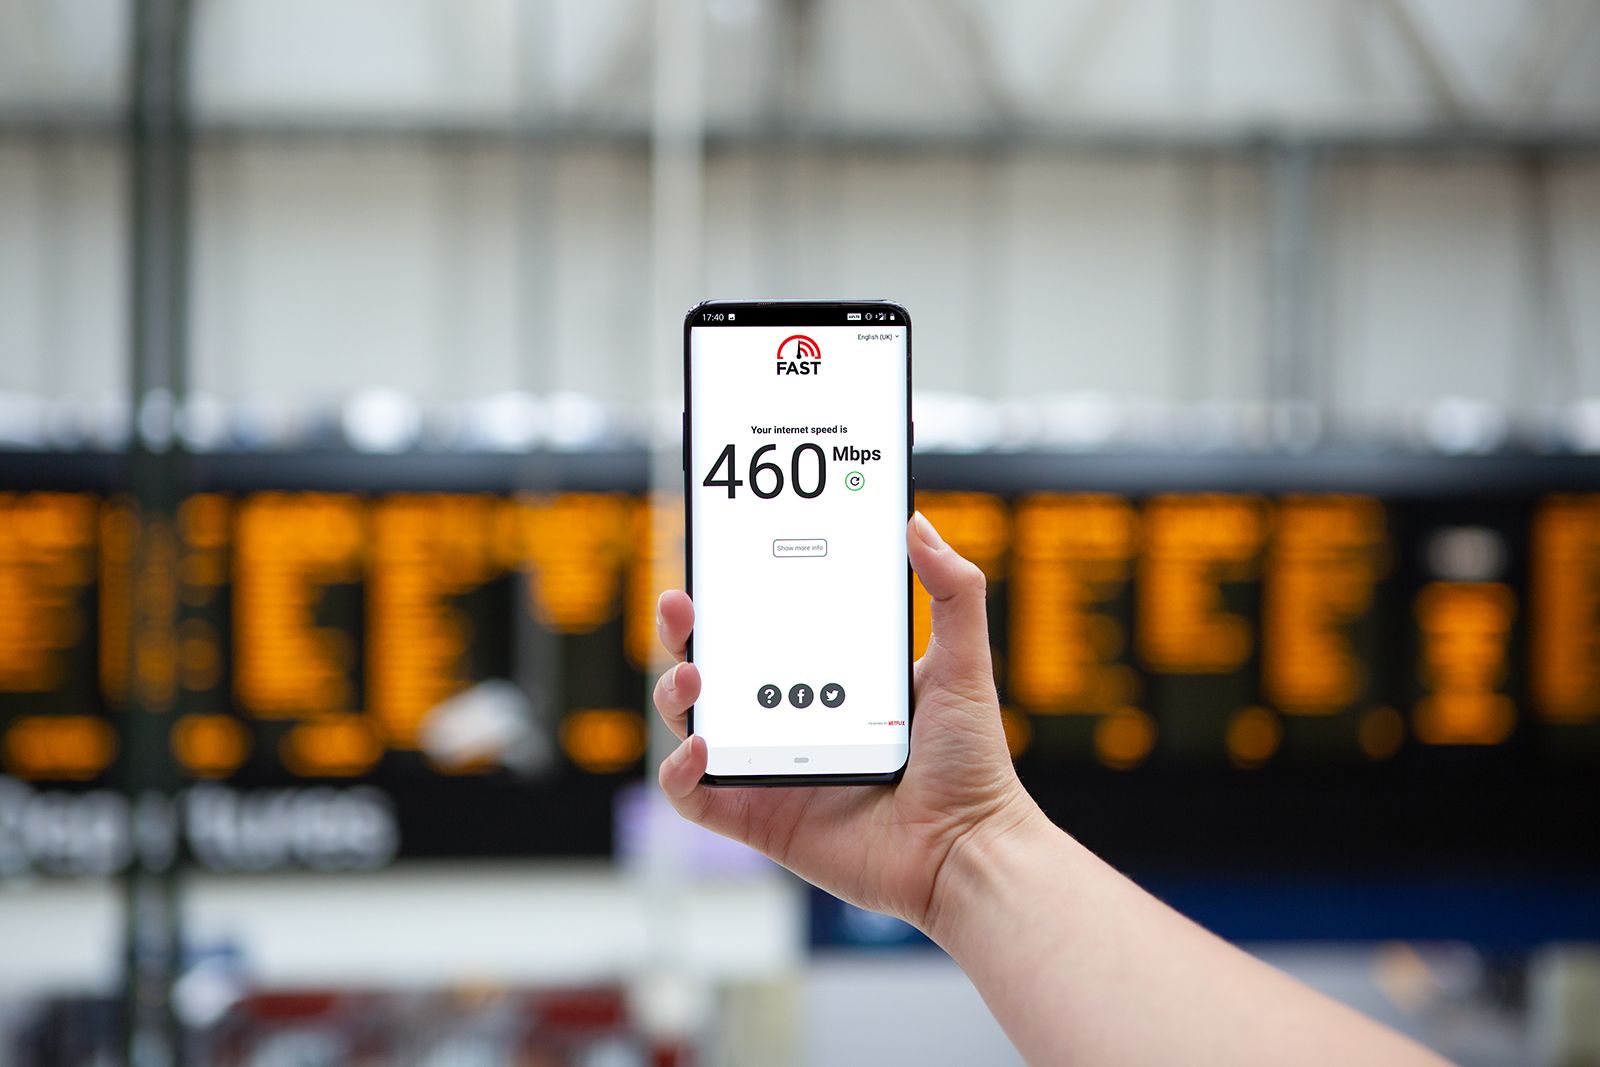 EE 5G rollout continues with major London rail stations and other UK landmarks image 1